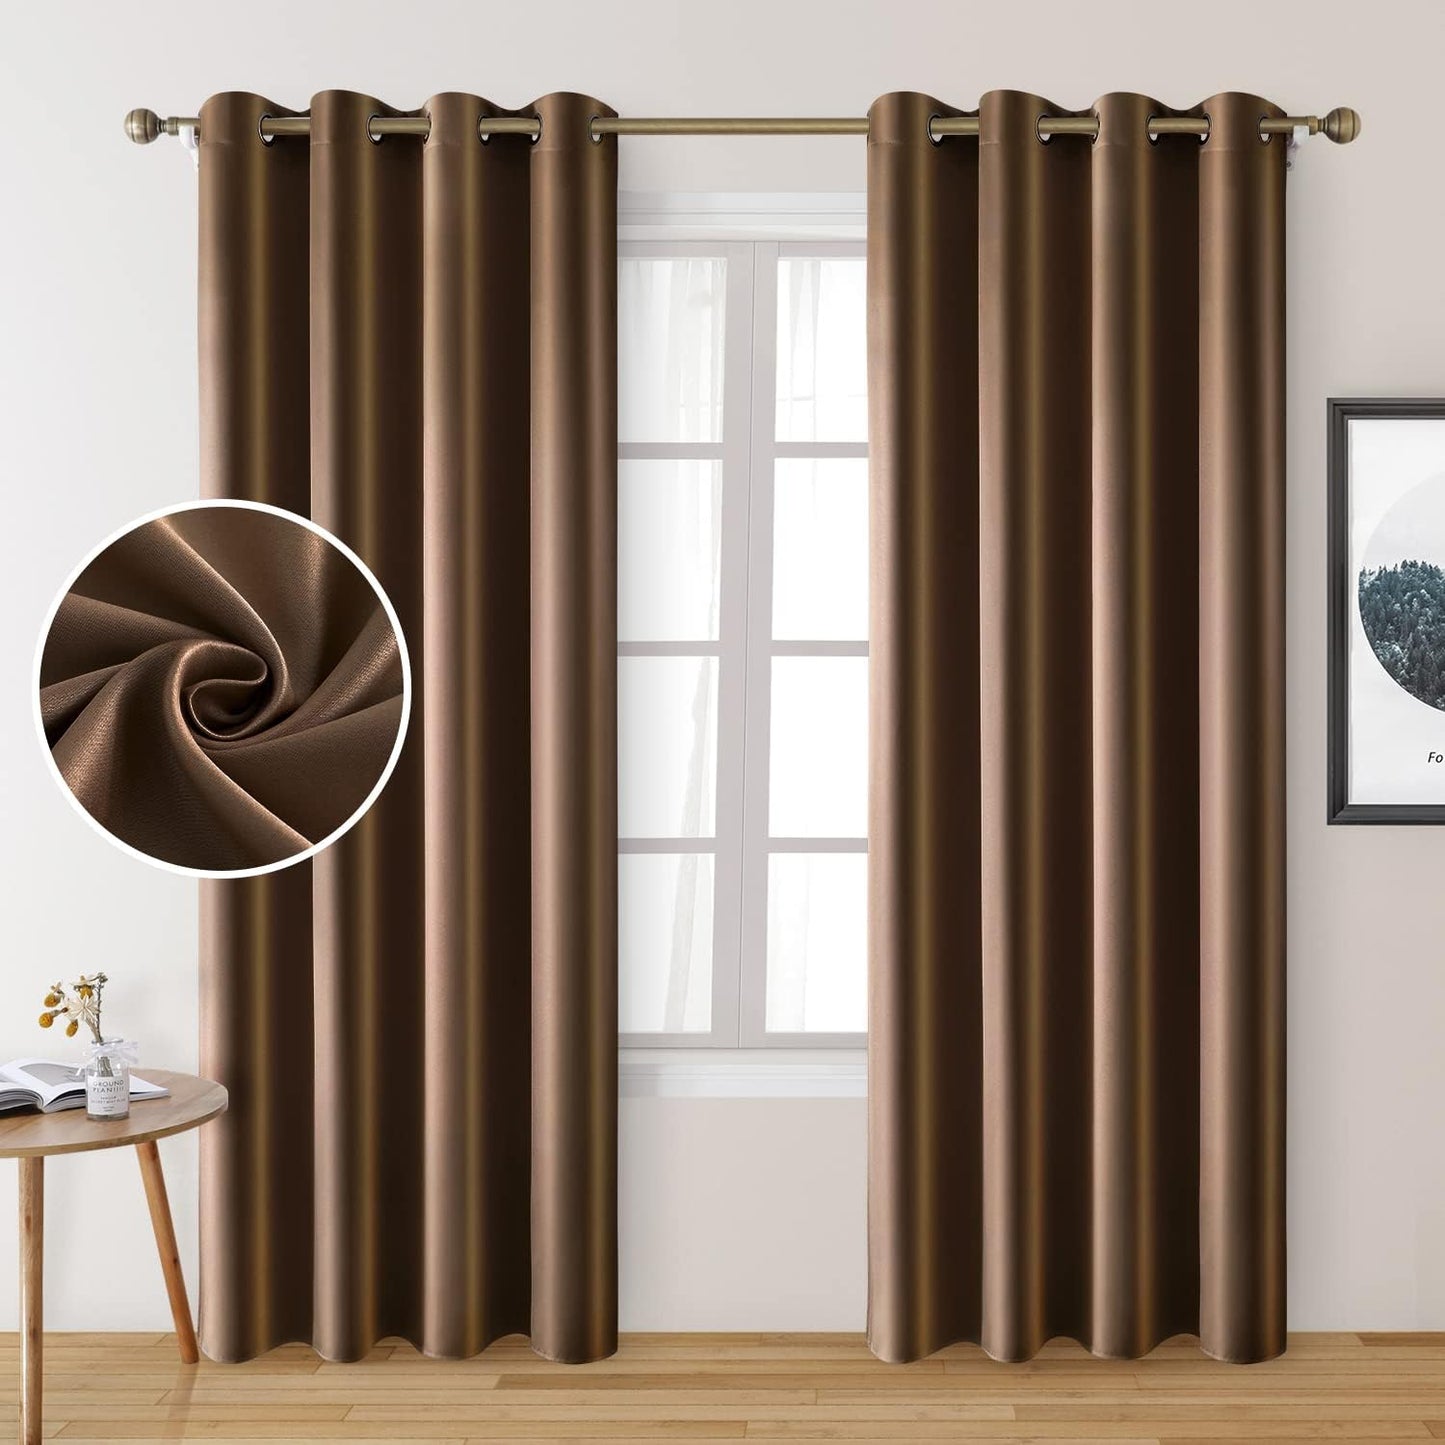 HOMEIDEAS Gold Blackout Curtains, Faux Silk for Bedroom 52 X 84 Inch Room Darkening Satin Thermal Insulated Drapes for Window, Indoor, Living Room, 2 Panels  HOMEIDEAS Chocolate 52" X 84" 